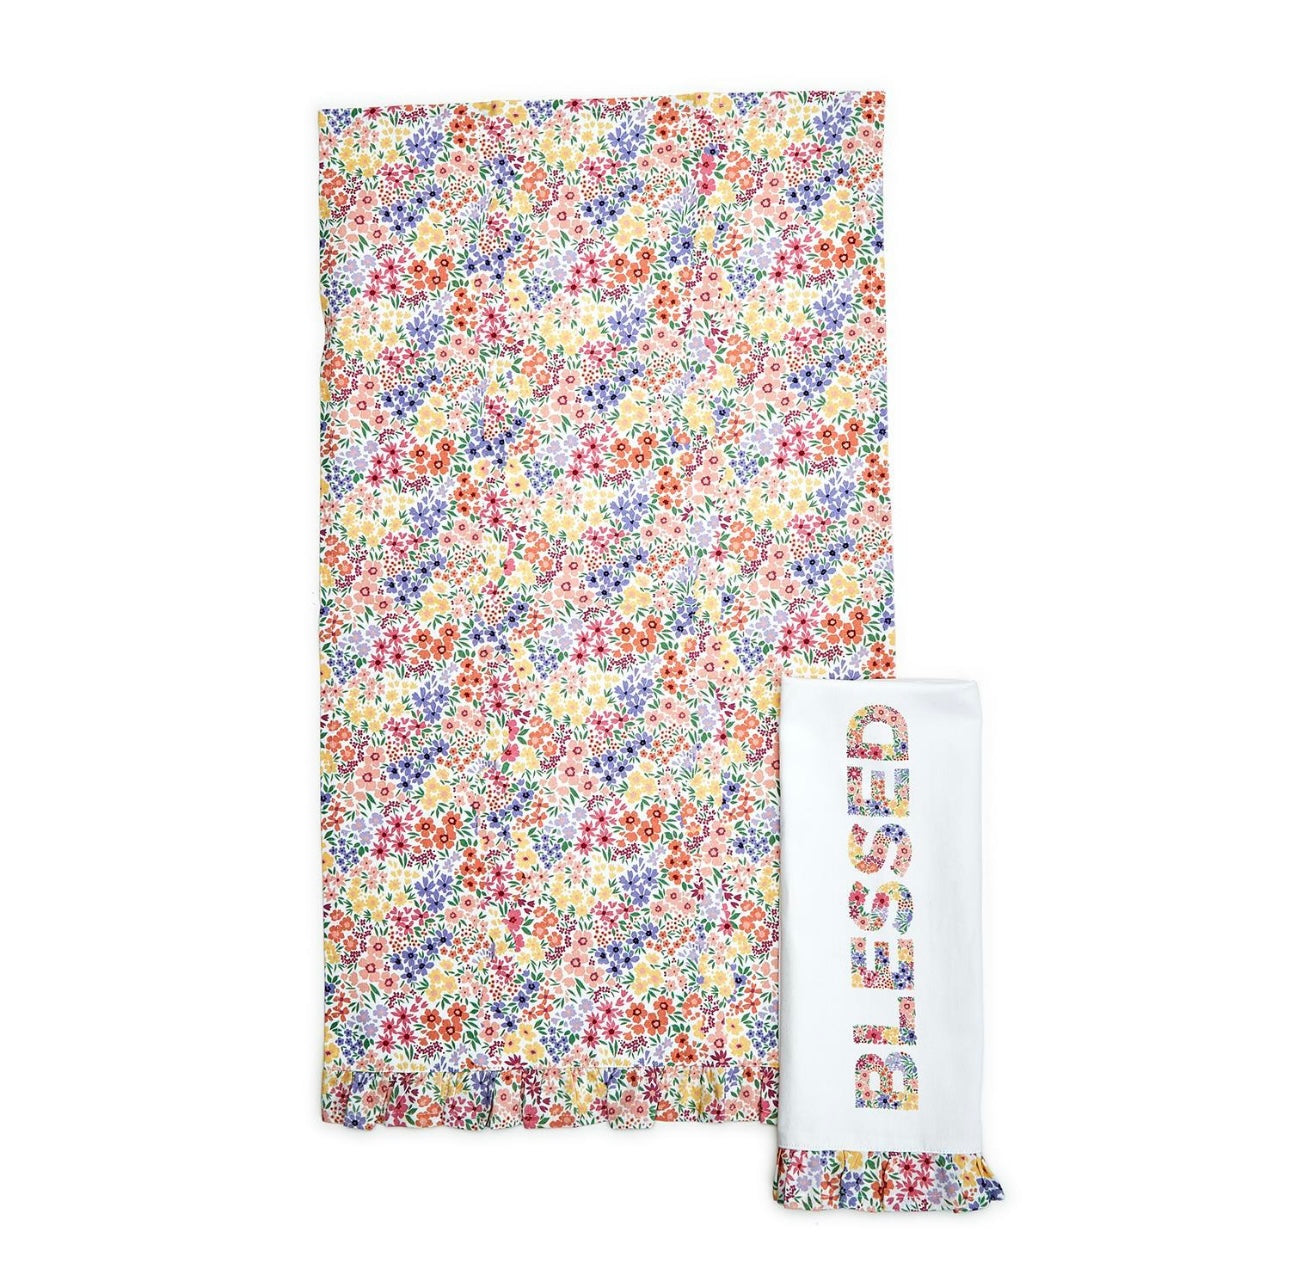 Blooms Set of 2 Floral Pattern Dish Towels with Ruffle